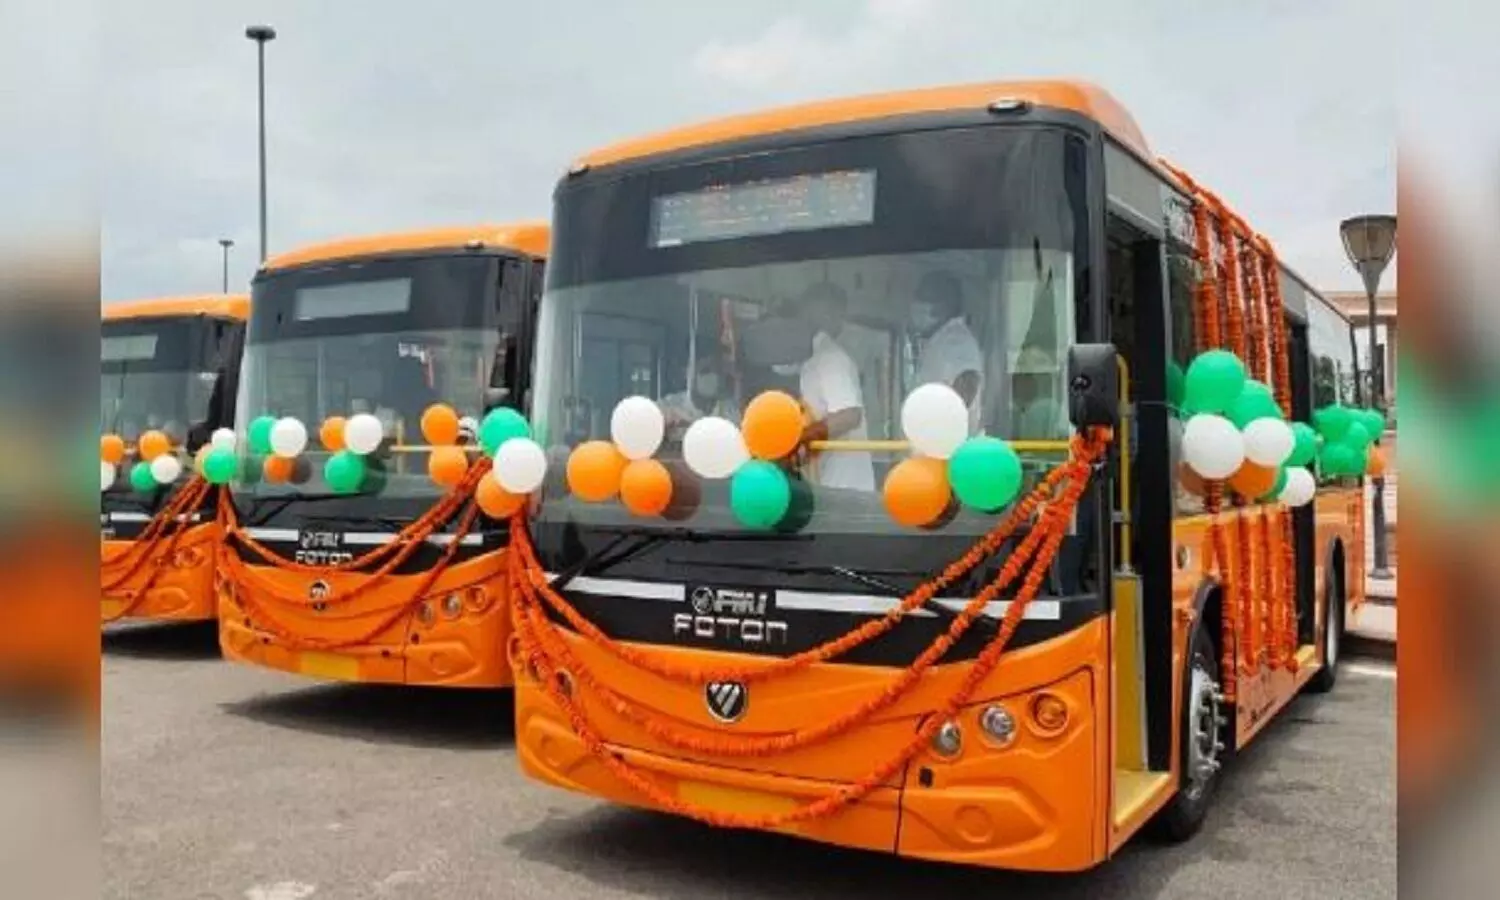 Fare of electric buses increased